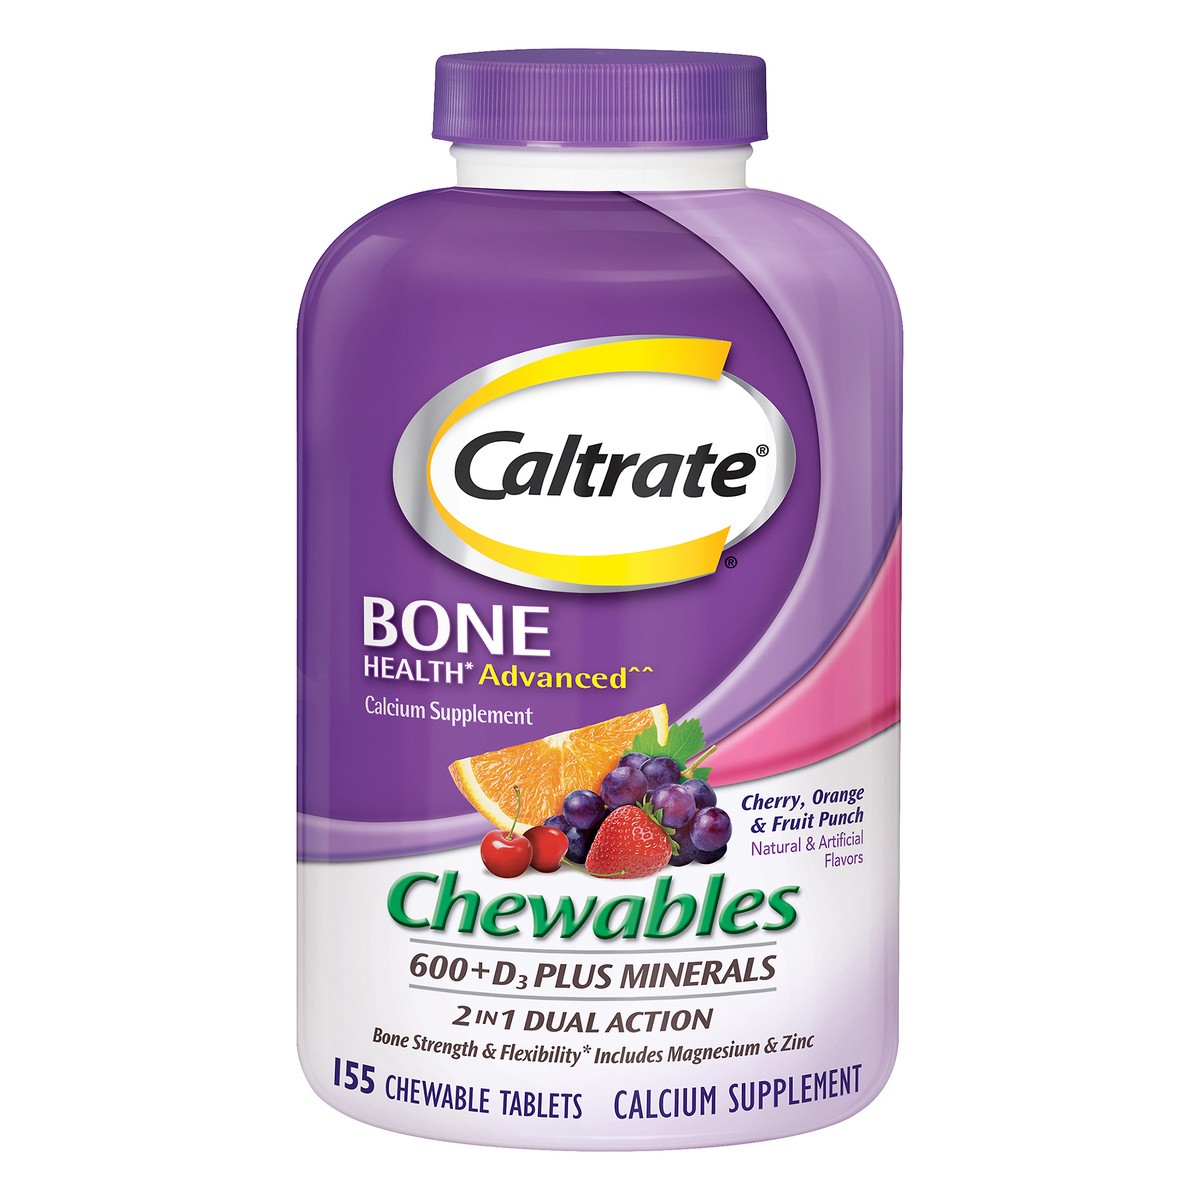 slide 1 of 7, Caltrate 600+D3 Plus Minerals (Cherry, Orange, and Fruit Punch, 155 Count) Calcium & Vitamin D3 Chewable Supplement, 600mg, 155 ct